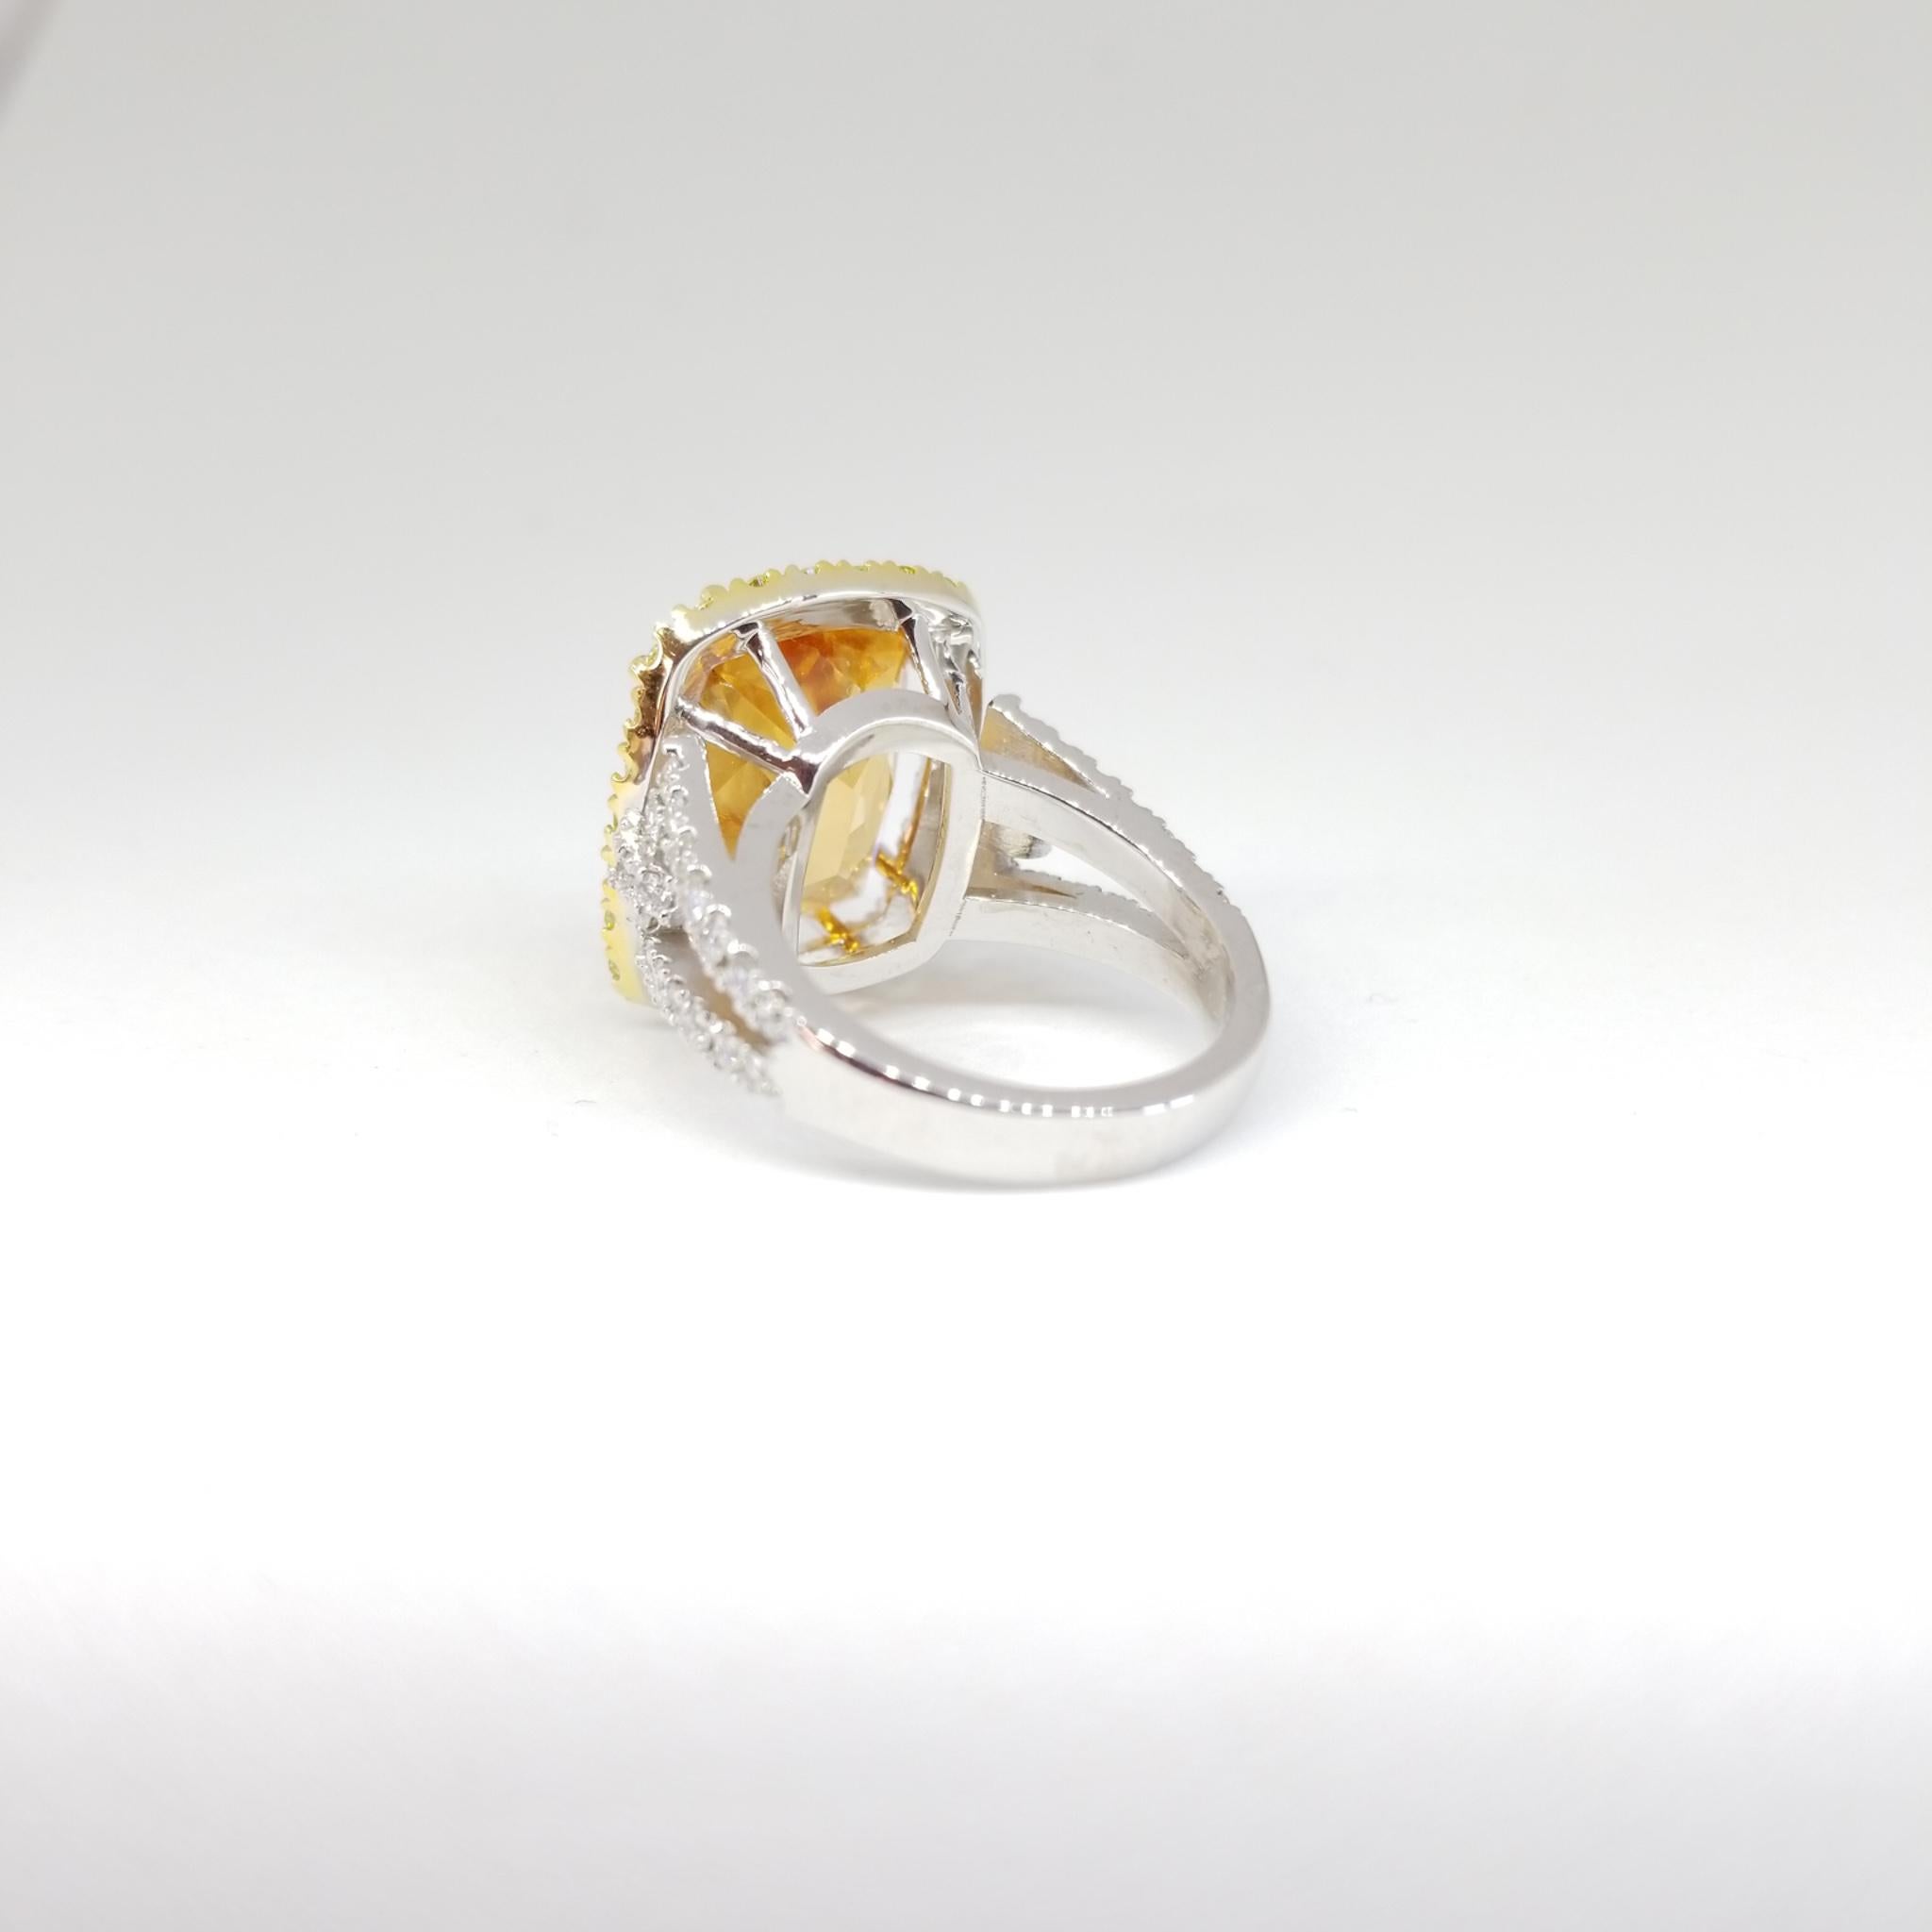 13.46 Carat Natural Grossular Garnet 1.75 Carat Canary and White Diamond Ring For Sale 4